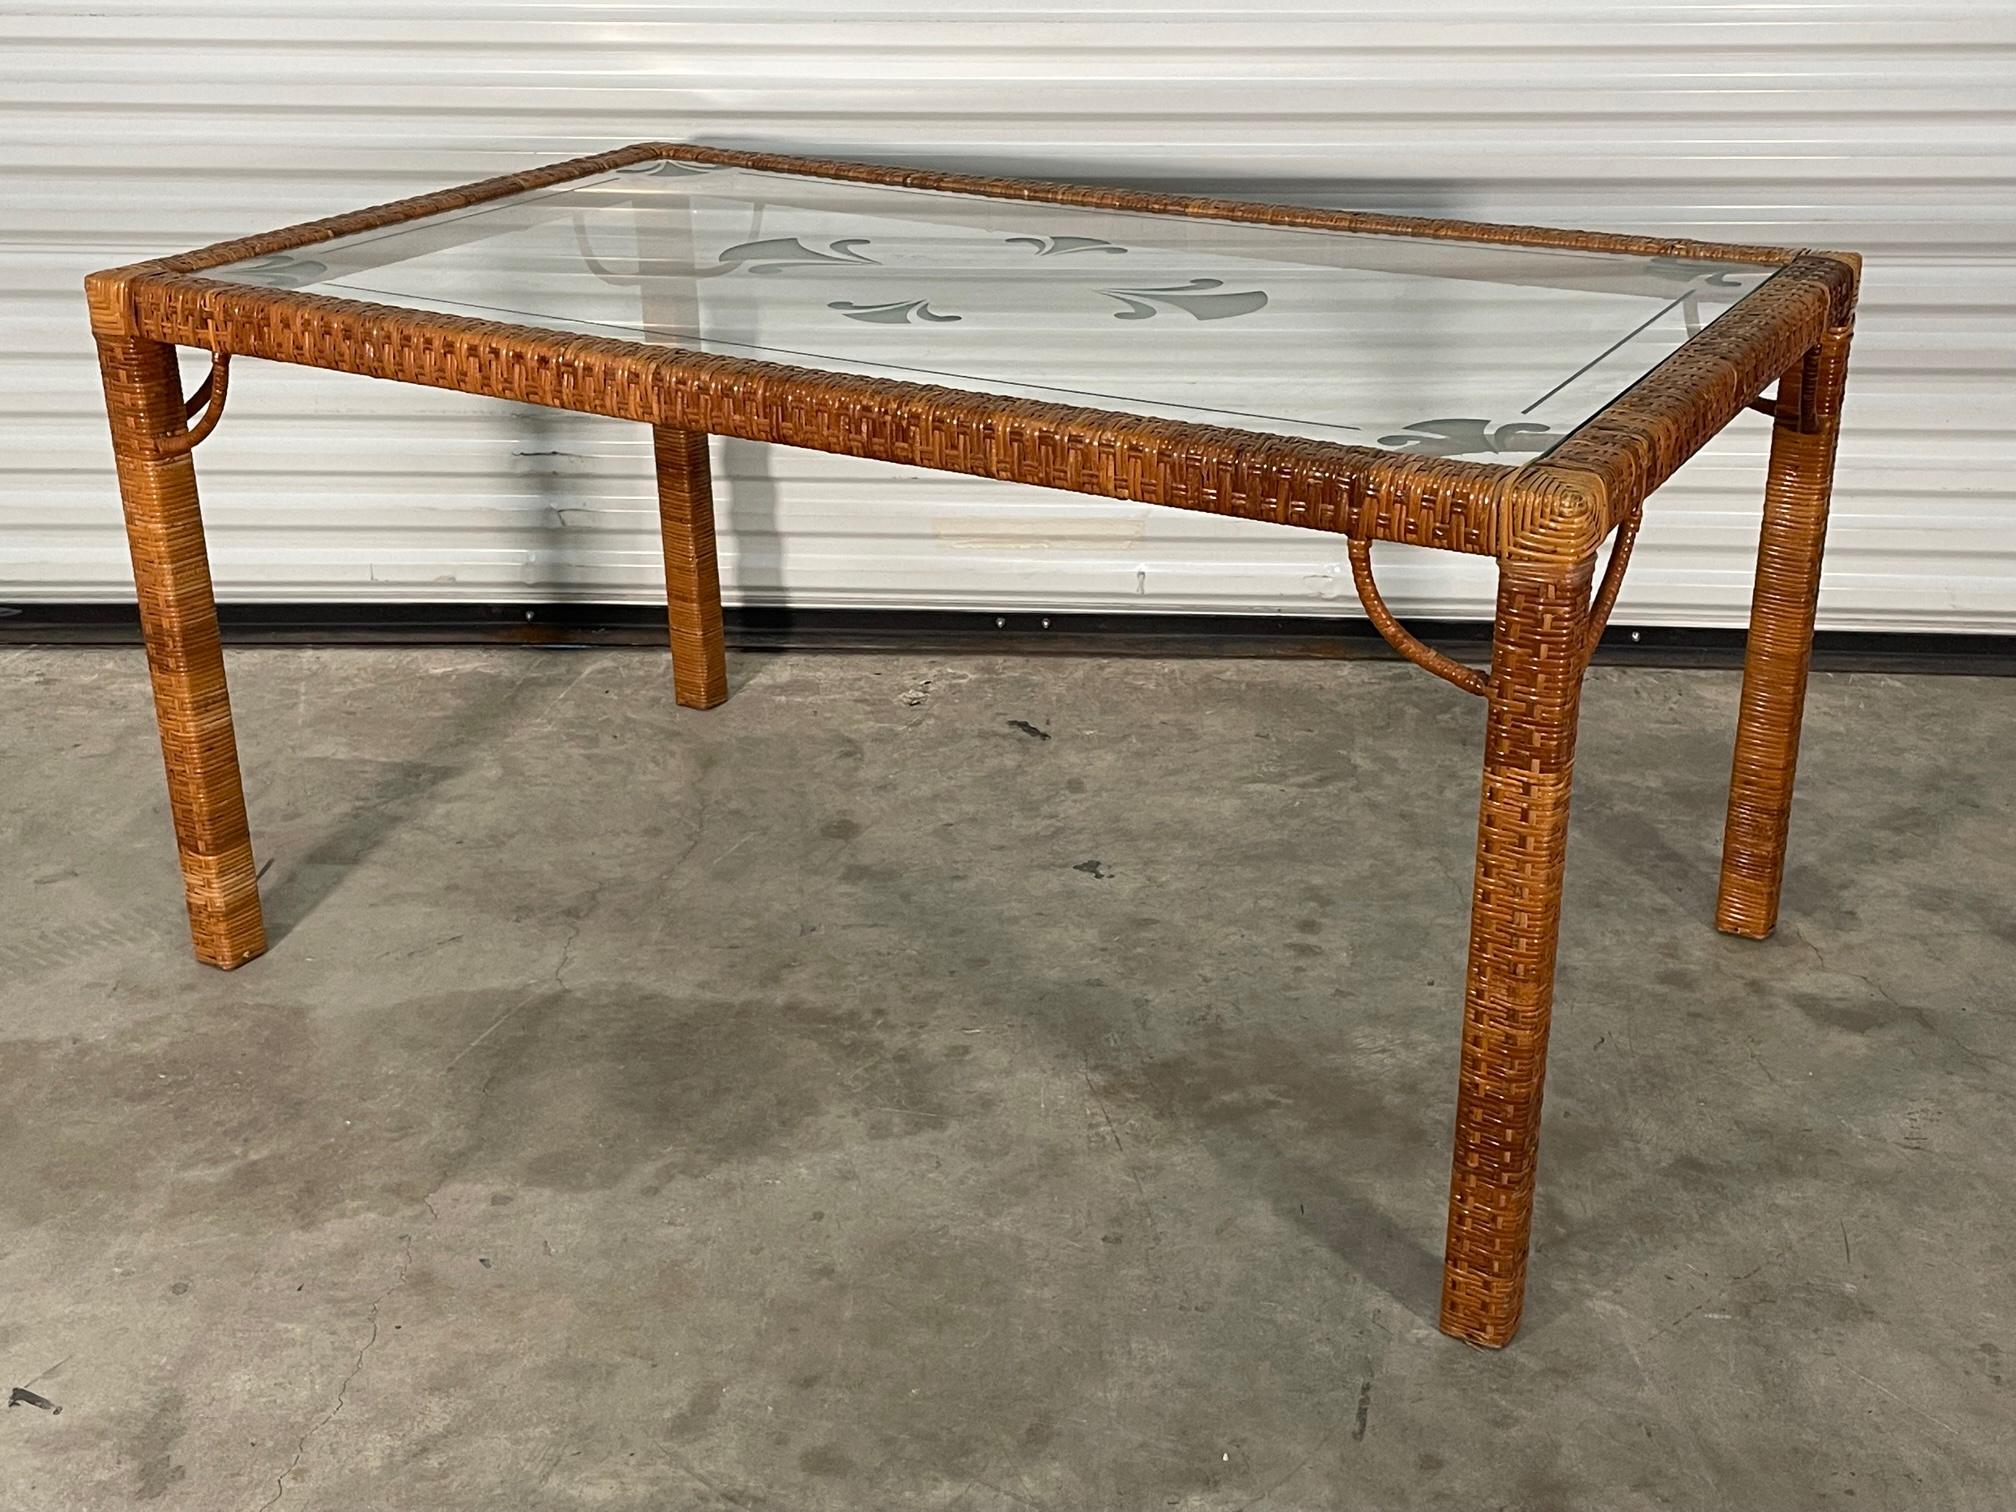 Vintage dining table features a full wicker wrap in a basketweave style. Glass top features etched designs with a modern take on the fleur-de-lis. Good condition with imperfections consistent with age. May exhibit scuffs, marks, or wear, see photos